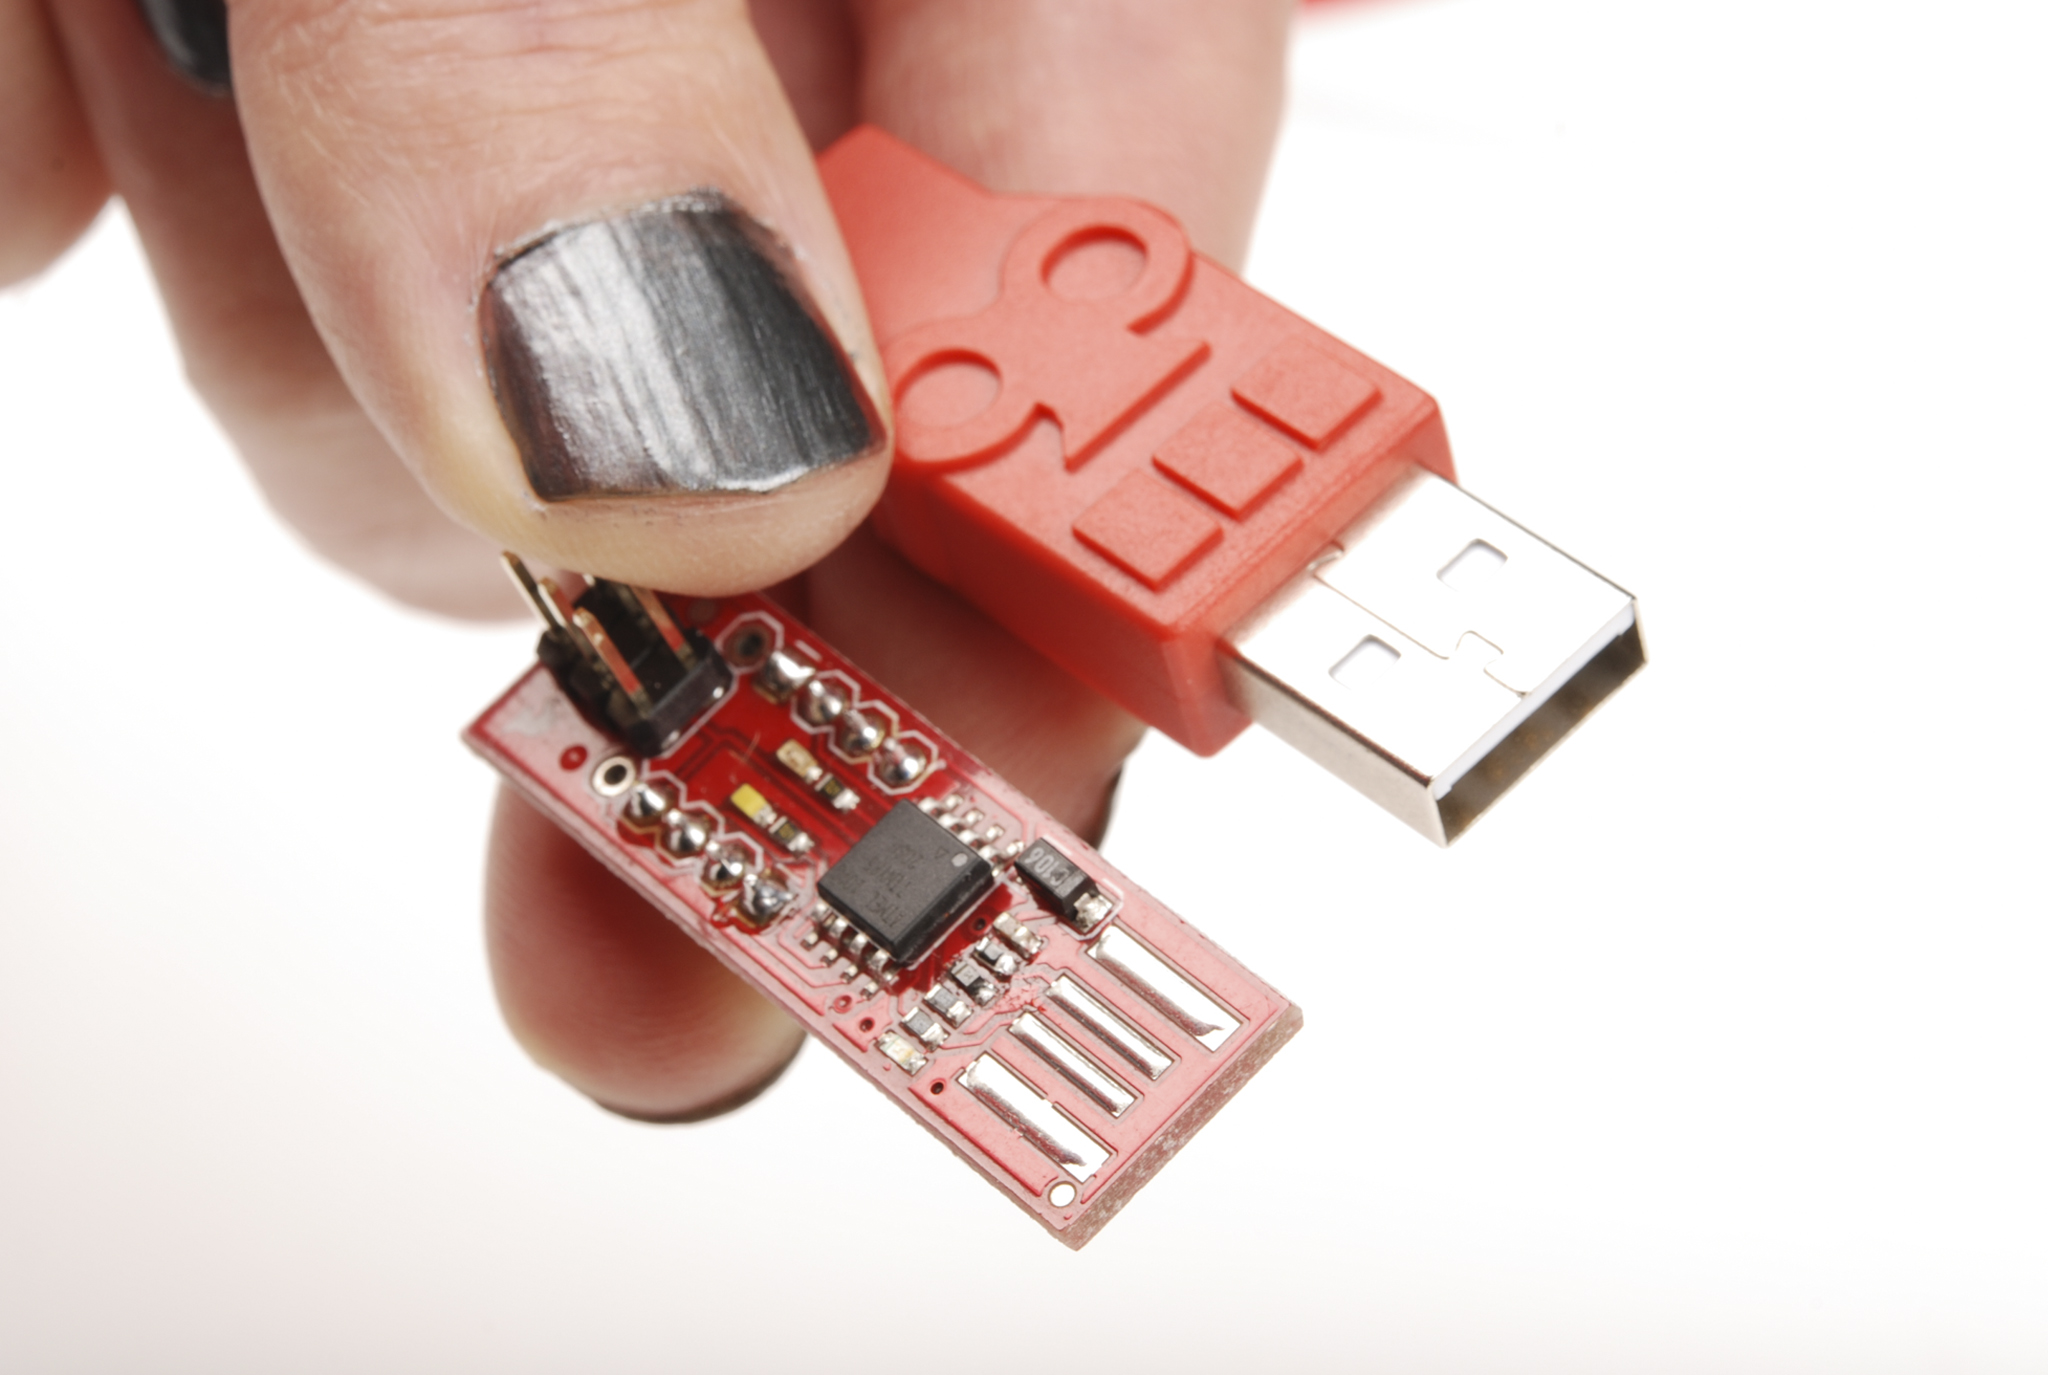 USB Pinout, Wiring and How It Works